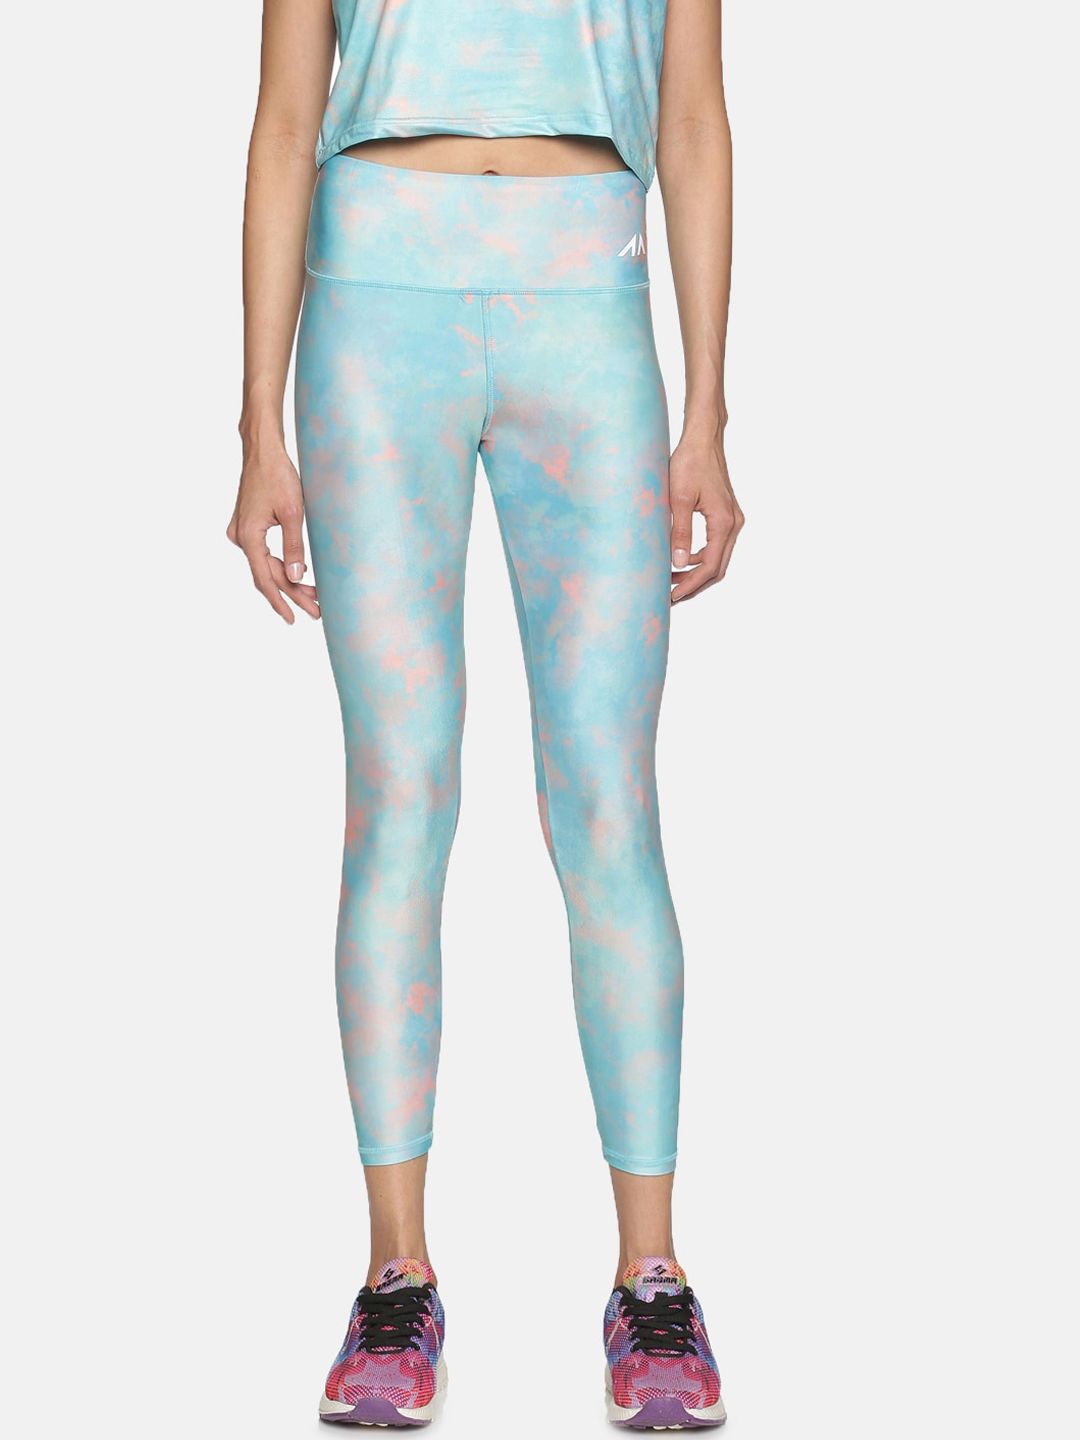 AESTHETIC NATION Women Sea Green & Pink Tie & Dye Mid Rise Slim Fit Gym Tights Price in India